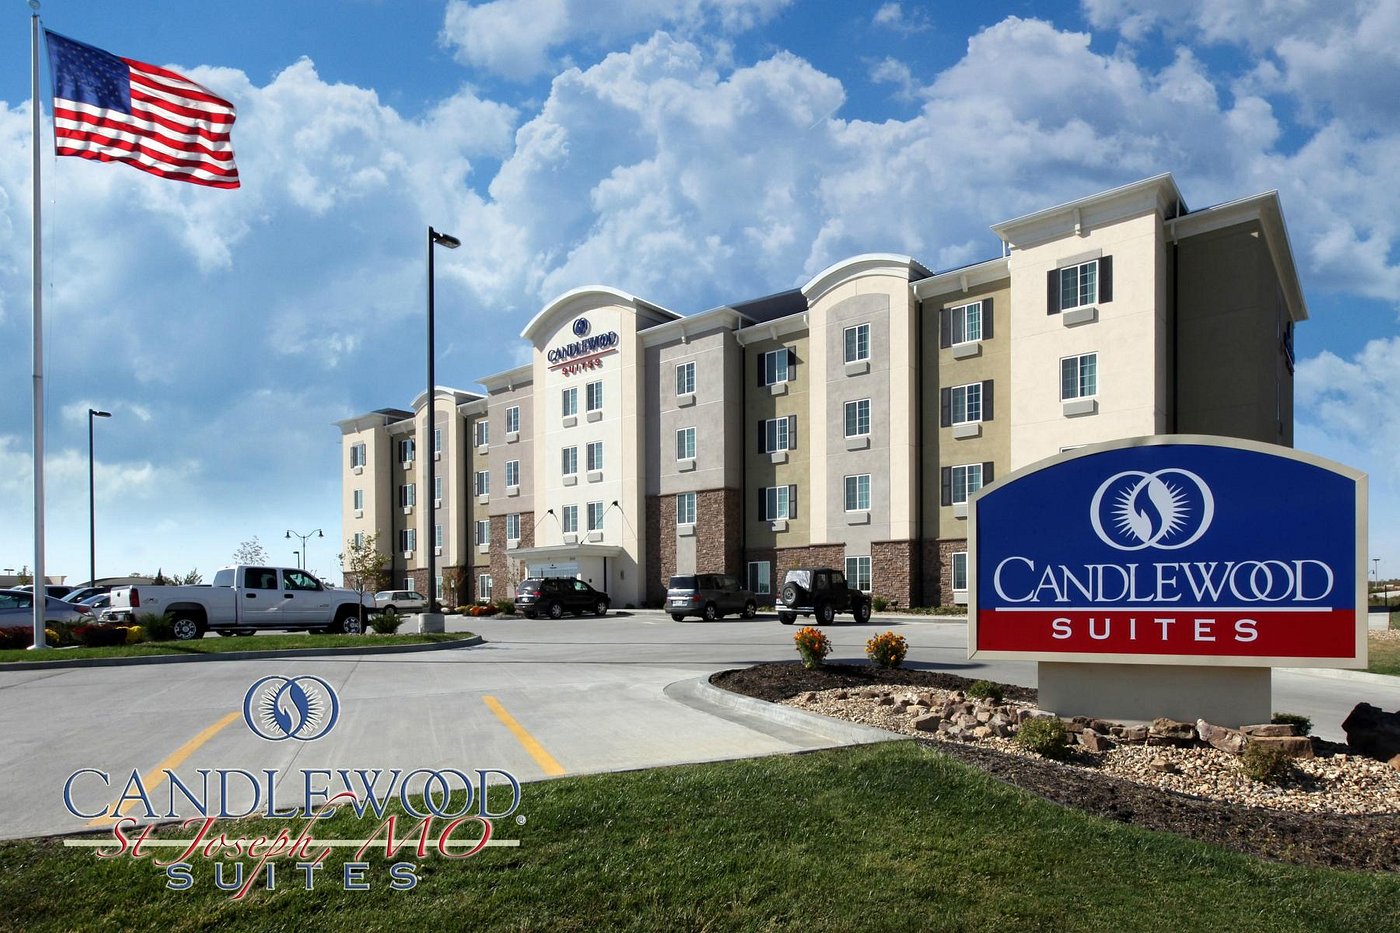 Candlewood Suites St ?w=1400&h= 1&s=1